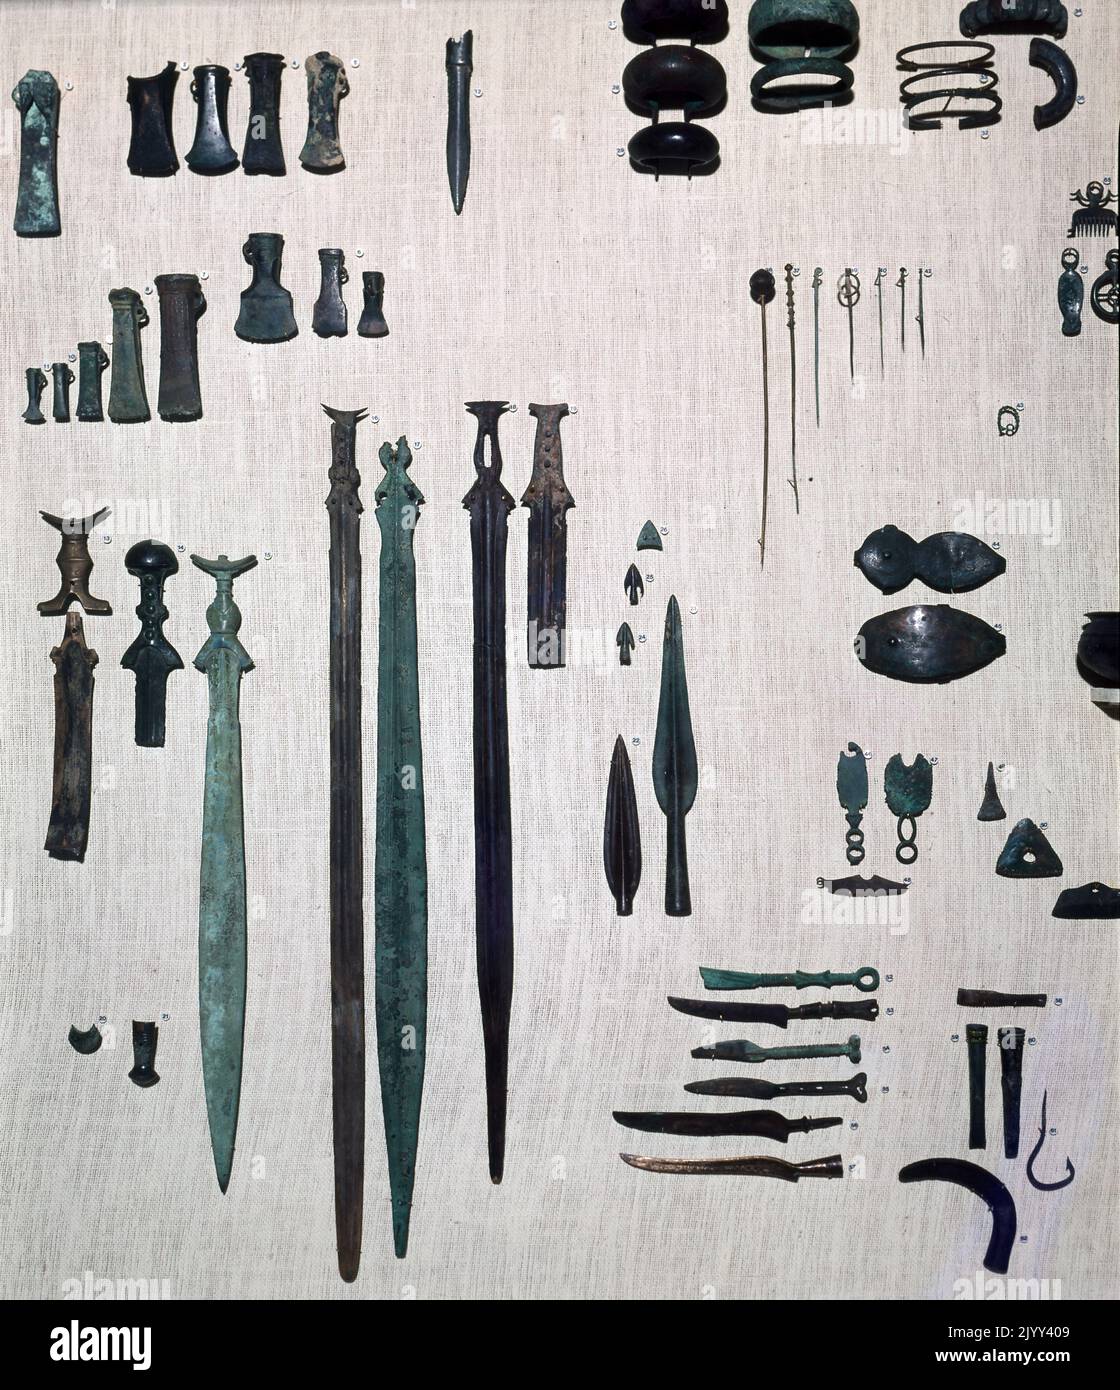 Iron Age metalwork weapons; Hallstatt culture; Western and Central European culture of Early Iron Age Europe from the 8th to 6th centuries BC, developing out of the Urnfield culture of the 12th century BC (Late Bronze Age). The weapons include, axes, spears, swords and daggers. Stock Photo